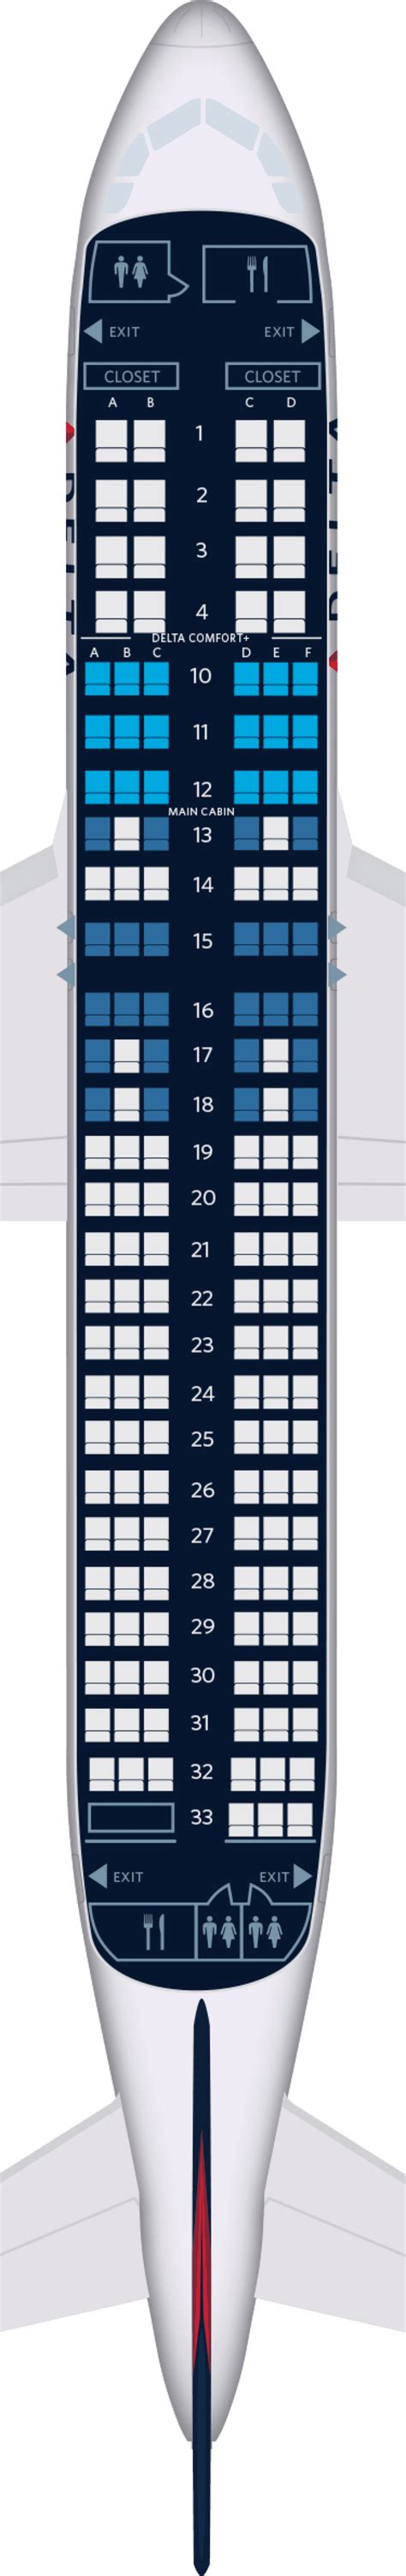 Airbus A321 Seat Map Alaska Review Home Decor